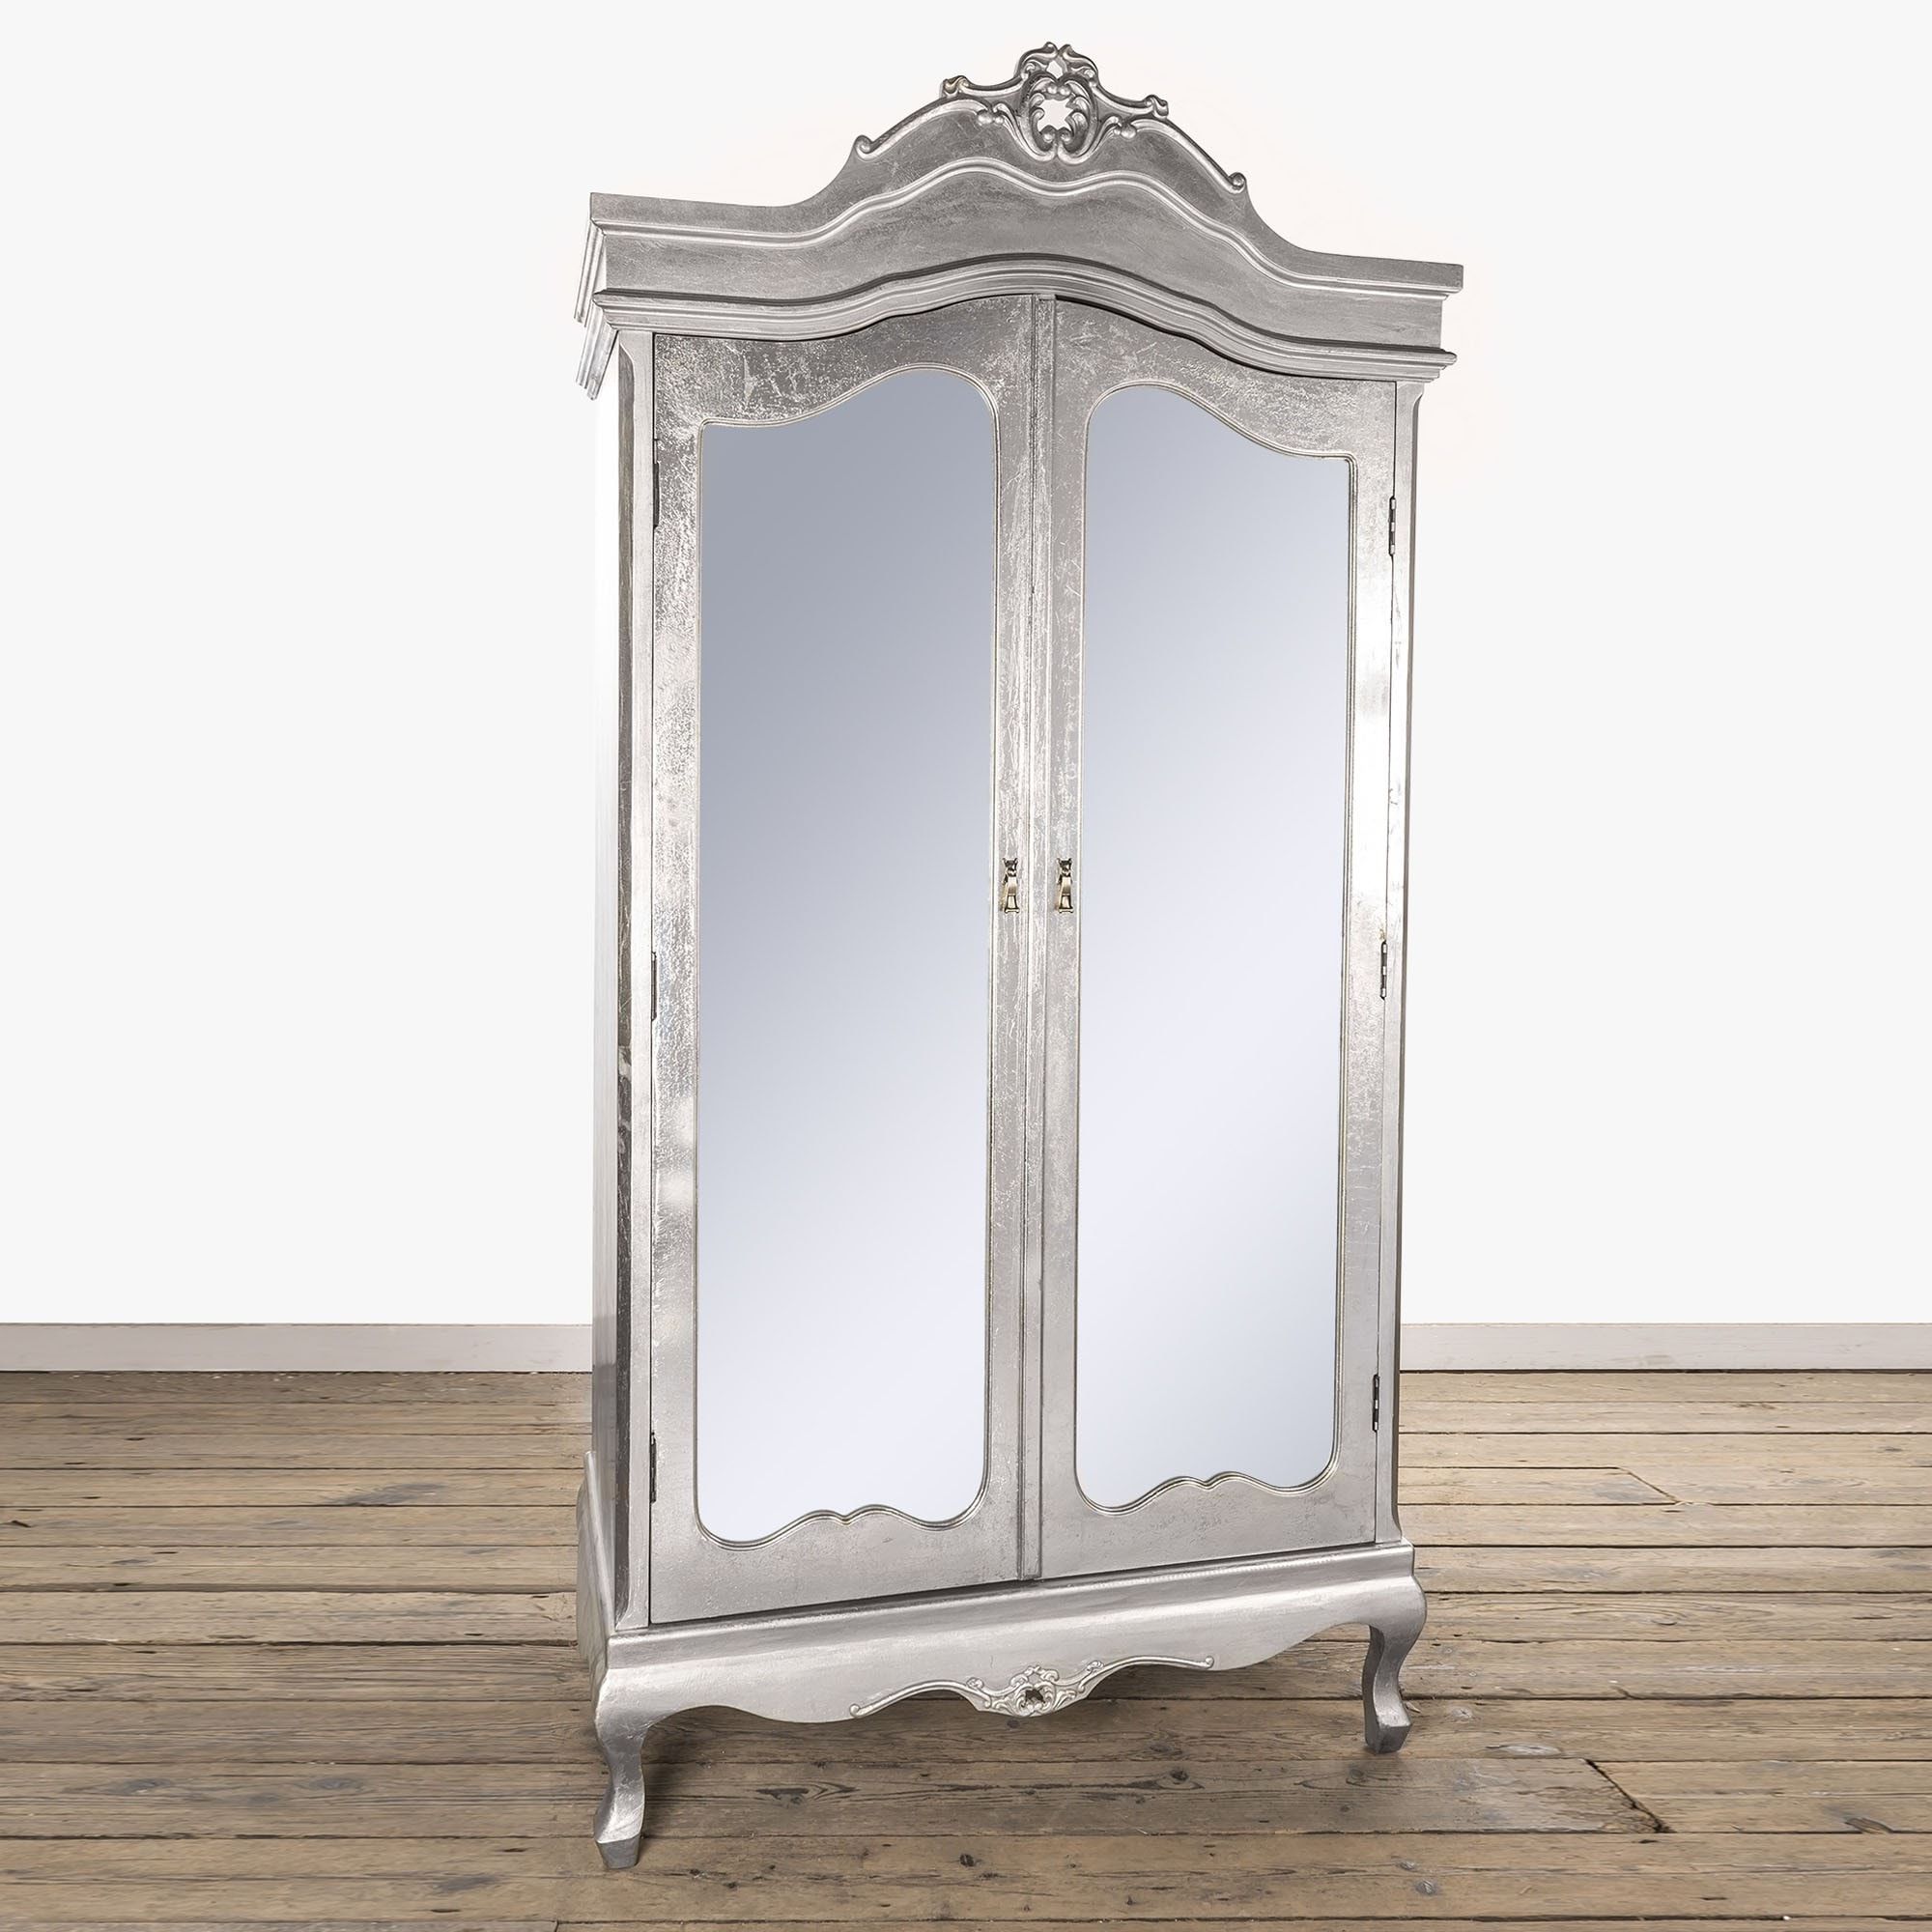 Antique French Styled Silver Annabelle Mirrored Wardrobe | Mirrored Wardrobe Intended For Silver Wardrobes (Gallery 8 of 20)